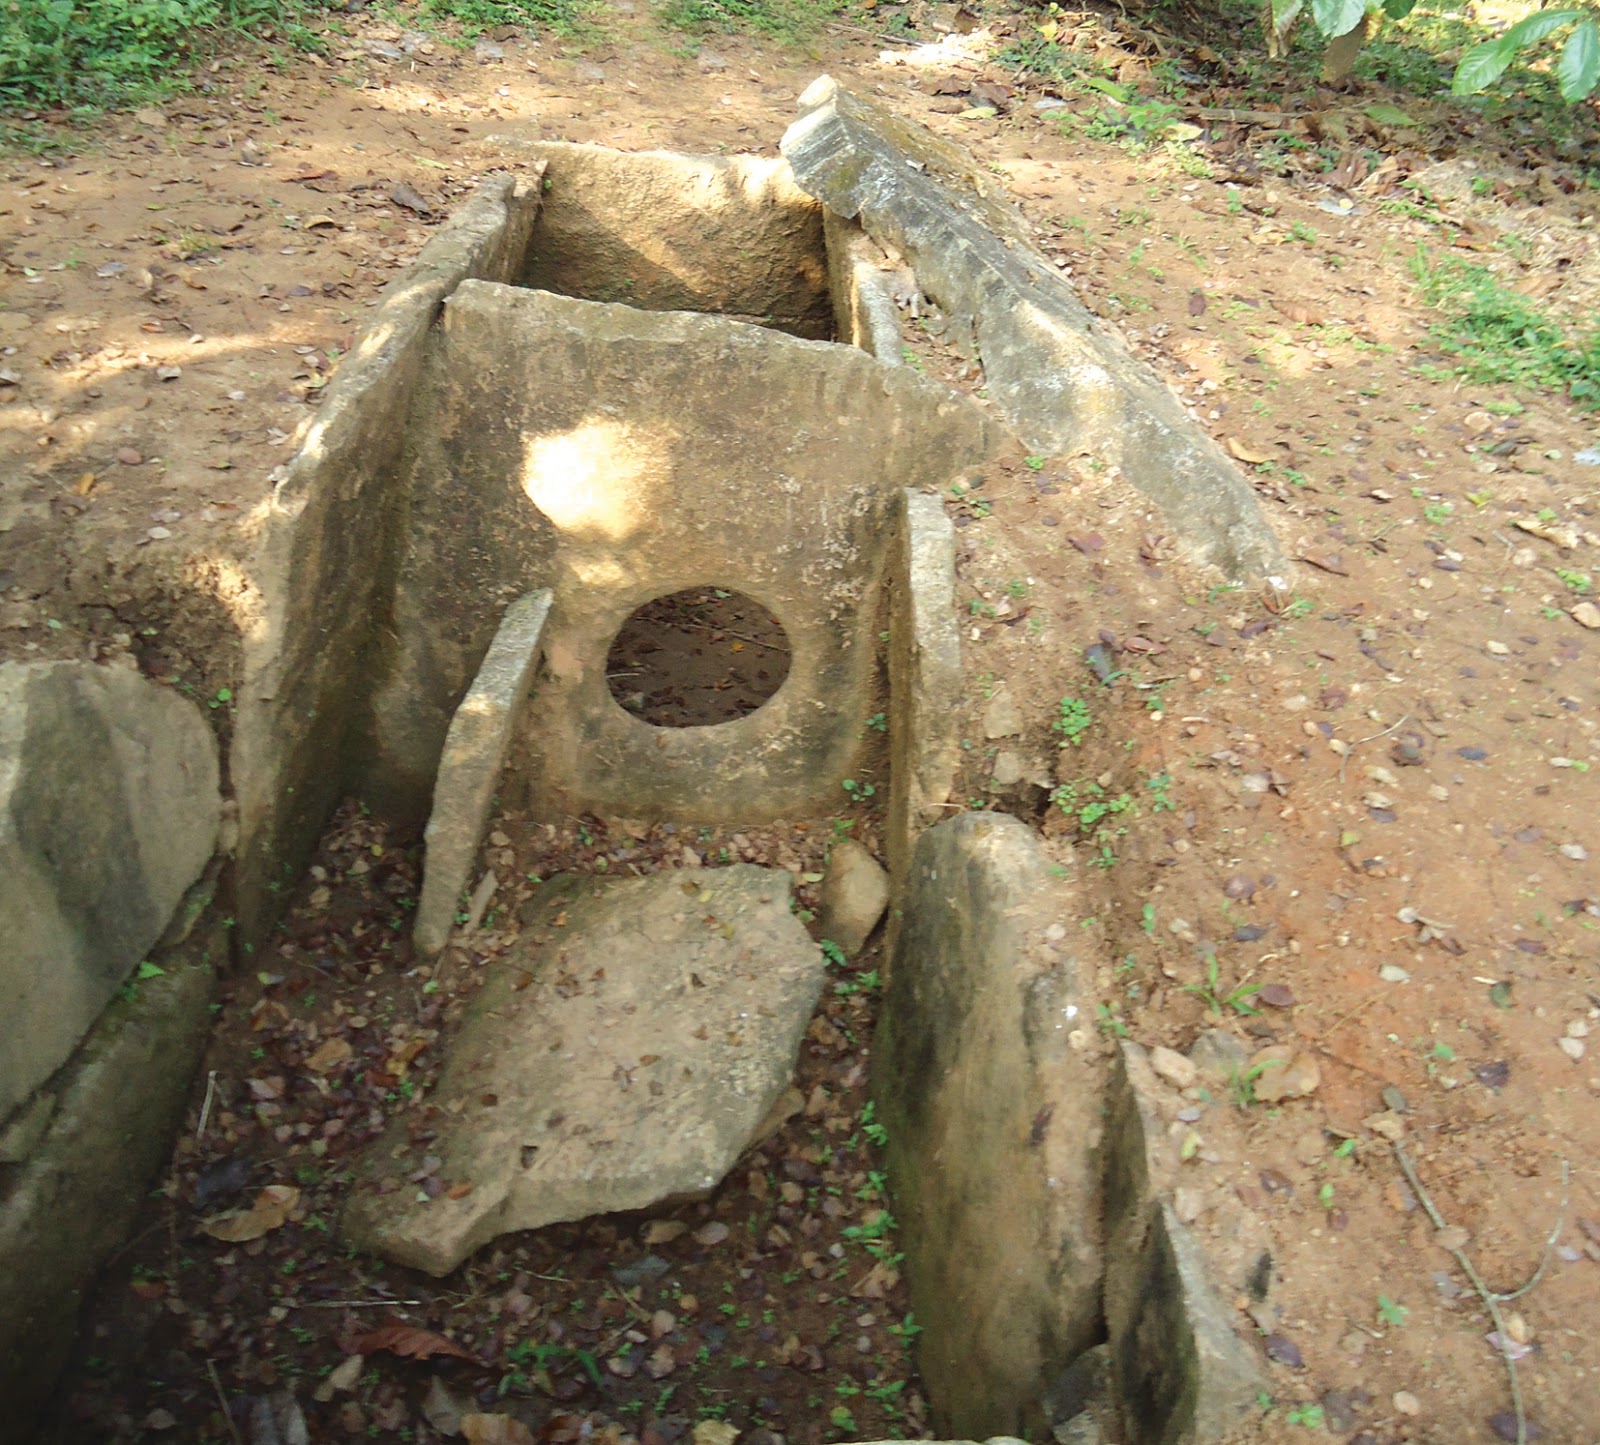 Dolmen in India

Megalithica.ru